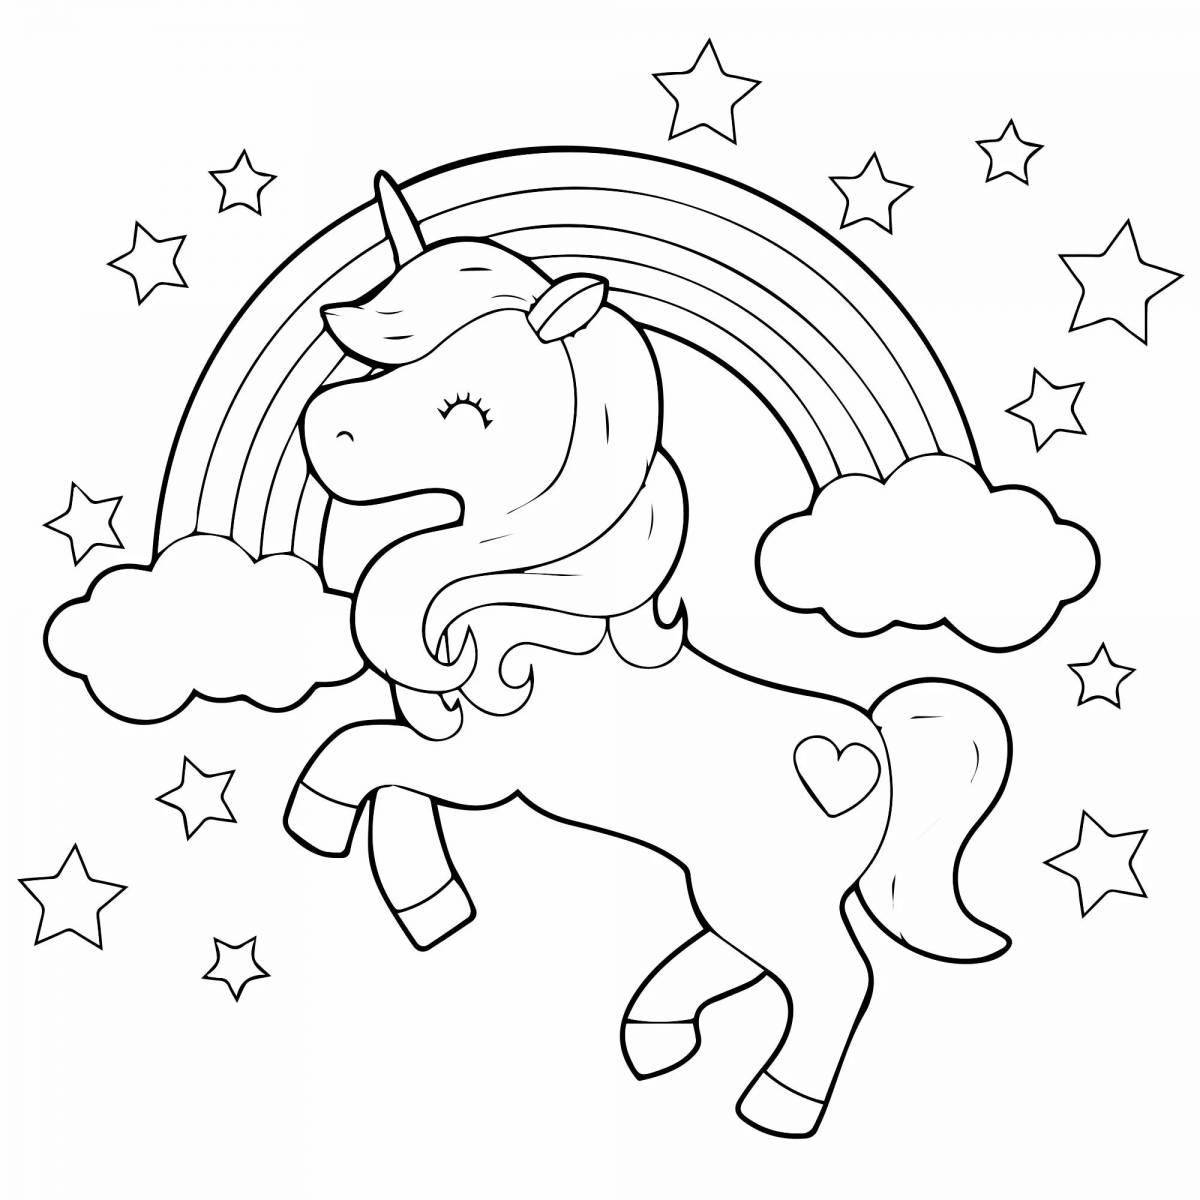 Radiant coloring page for girls unicorn cute